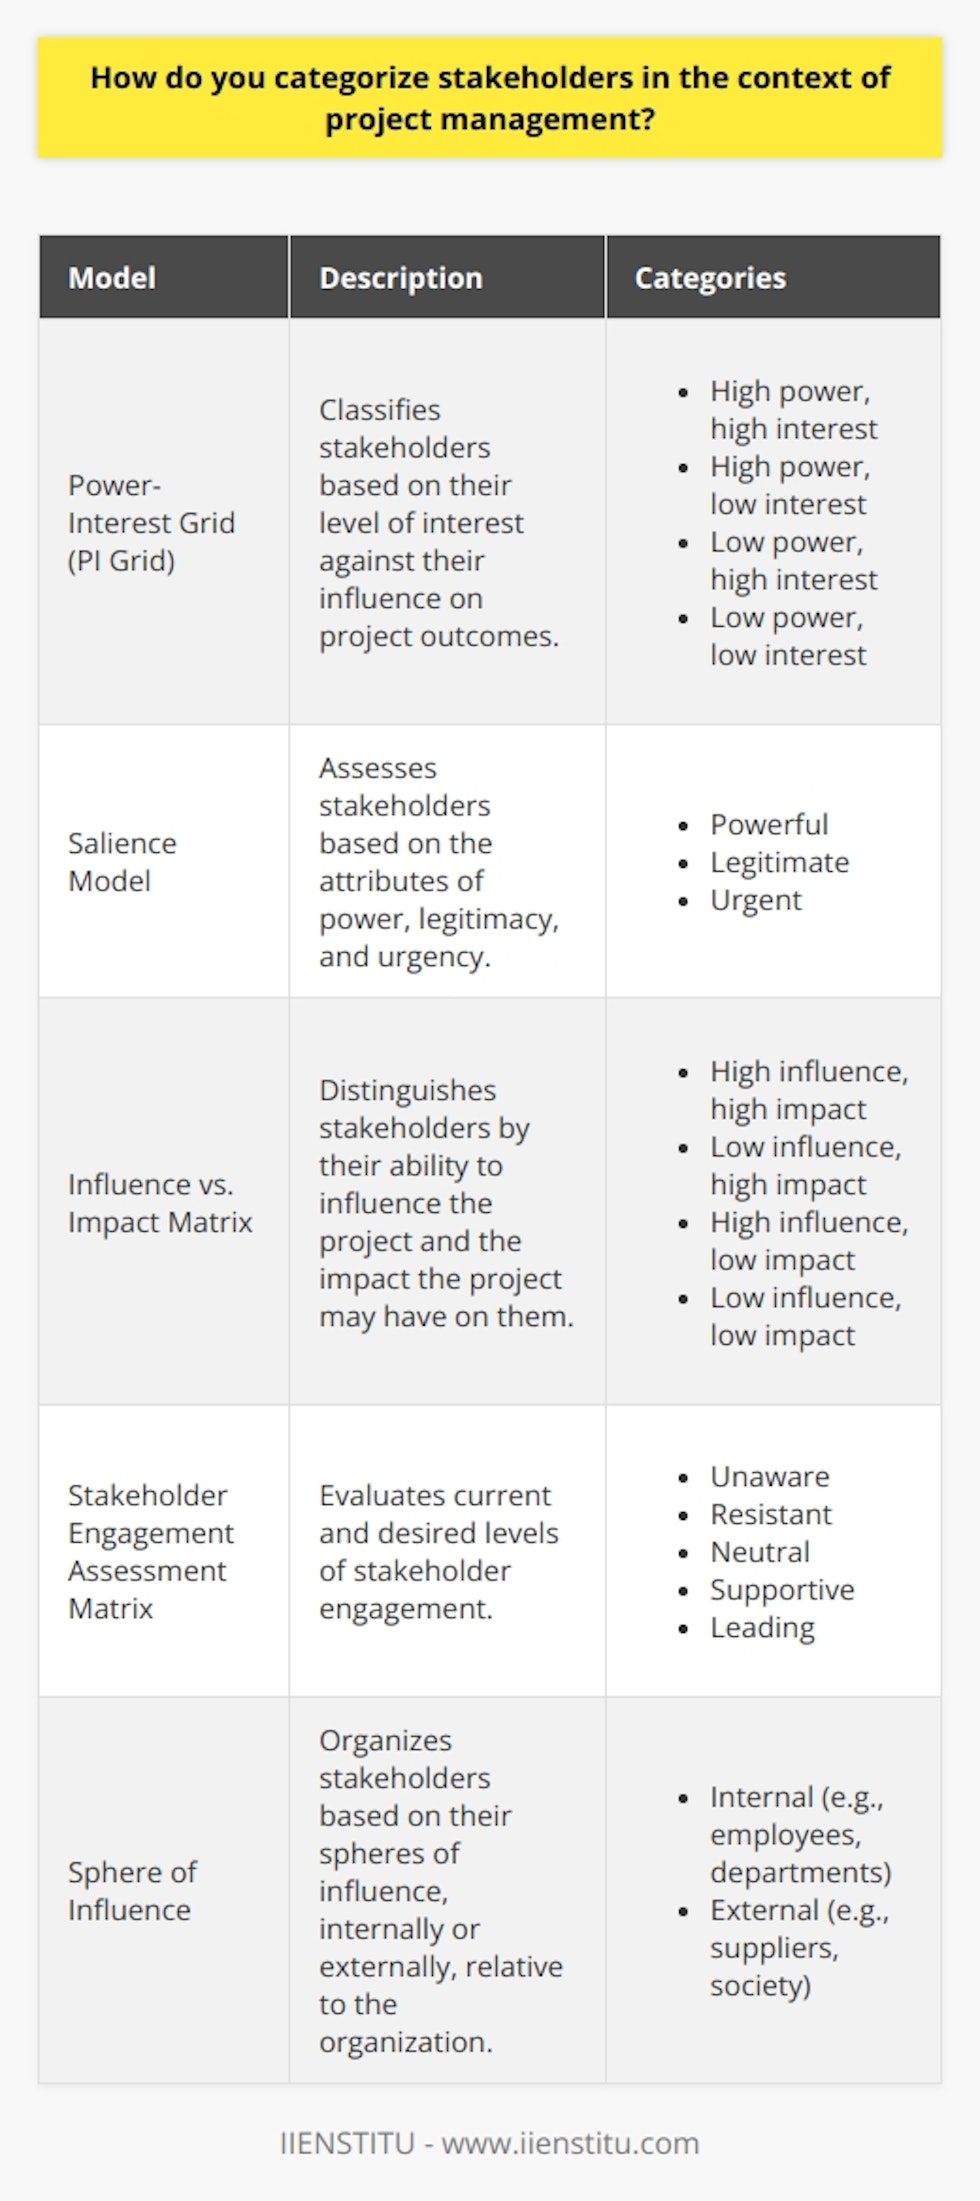 Effective stakeholder management is a pivotal aspect of successful project management, and categorizing stakeholders accordingly is a critical step in this process. The categorization of stakeholders allows project professionals to pinpoint how best to engage with, manage, and communicate to various individuals or groups based on their influence, expectations, and interests in the project. Below are several recognized methods for categorizing stakeholders in project management:**Power-Interest Grid (PI Grid):**Perhaps the most widely utilized model, the Power-Interest Grid, is used to classify stakeholders by charting their level of interest in the project against their power to influence its outcomes. This creates a four-quadrant matrix identifying stakeholders as follows:- **High power, high interest:** These stakeholders are key players who have significant influence and a vested interest in the project's success. They often require close engagement and regular communication.- **High power, low interest:** Individuals or groups in this quadrant can significantly impact the project but are less concerned with its output. Their engagement is usually maintained to ensure no surprises occur.- **Low power, high interest:** These stakeholders are typically more concerned with the project's output, even though they might not have the power to influence it directly. Keeping them informed and consulted is important.- **Low power, low interest:** Those falling into this category have minimal influence and interest and typically require less frequent communication.**Salience Model:**The salience model is a more nuanced stakeholder analysis tool that assesses stakeholders based on three attributes: power, legitimacy, and urgency. Stakeholders are identified based on whether their claims are seen as legitimate, how urgent their needs are, and the power they wield. This model helps in recognizing stakeholders who might be overlooked when only power and interest are considered.**Influence vs. Impact Matrix:**This categorization method differentiates stakeholders based on their potential to influence the project versus the impact the project may have on them. Stakeholders with high influence and high impact are typically the primary focus, while those with low impact and low influence may require less attention.**Stakeholder Engagement Assessment Matrix:**Project managers utilize this tool to understand the current level of stakeholder engagement and the desired level. It involves a matrix to categorize stakeholders as unaware, resistant, neutral, supportive, or leading. This allows for formulating specific strategies to move stakeholders toward higher engagement levels as necessary.**Sphere of Influence:**Stakeholders are organized based on the spheres of influence which may be internal or external to an organization. Internal stakeholders may include employees, departments, and management, while external stakeholders could encompass competitors, suppliers, regulatory agencies, and society at large.In conclusion, stakeholder categorization is a complex task that requires thorough analysis and strategic planning. Employing a mix of these methods offers a comprehensive approach to understanding and engaging various stakeholders throughout a project's lifecycle. This ensures that communication and interaction with stakeholders are handled effectively, leading to informed decision-making and higher chances of project success. Adopting these categorization techniques can help drive projects to meet their objectives while considering the input and impact on all stakeholders involved.